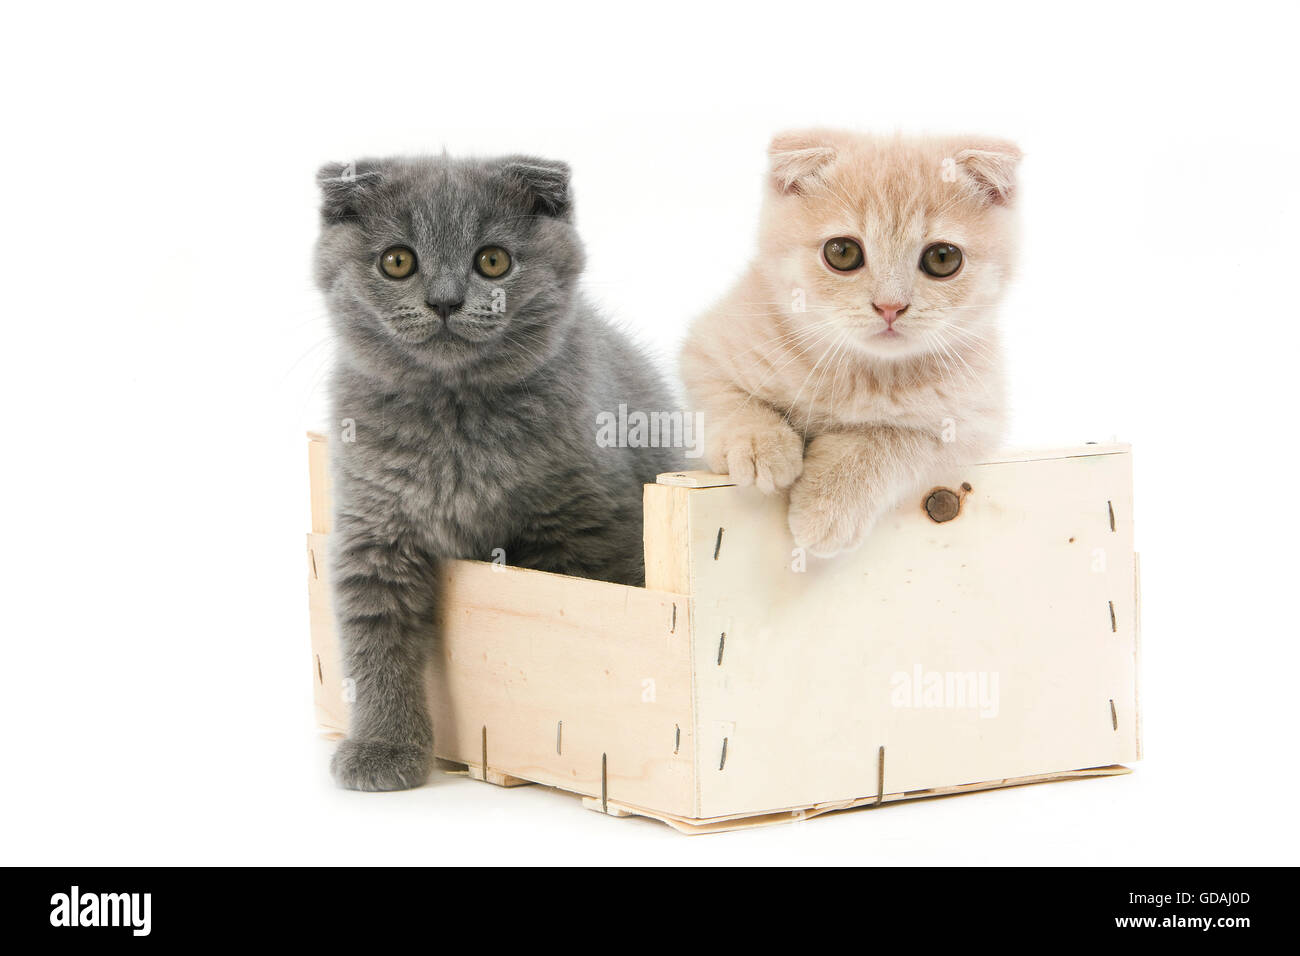 Blue Scottish Fold and Cream Scottish Fold Domestic Cat, 2 Months Old  Kittens playing in Crateful against White Background Stock Photo